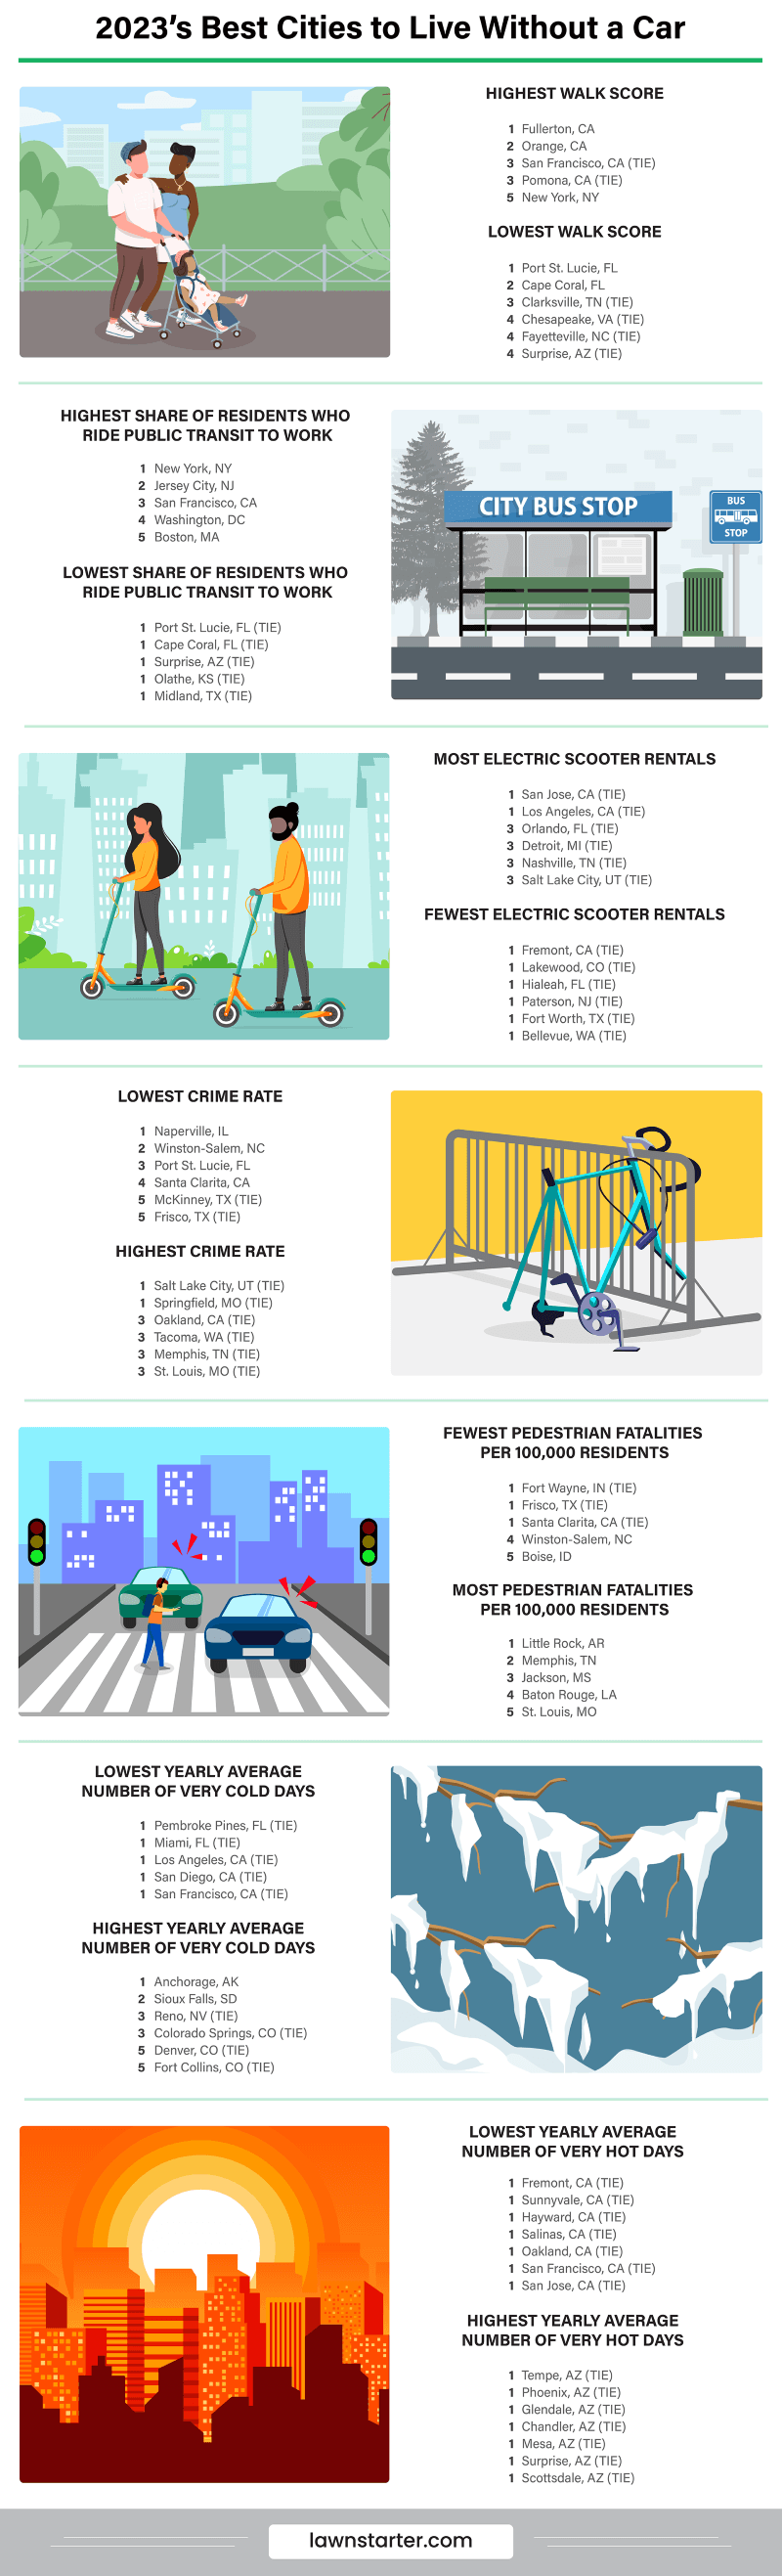 Infographic showing the Best Cities to Live Without a Car, a ranking based on walkability, pedestrian safety, climate, and current car-free practices